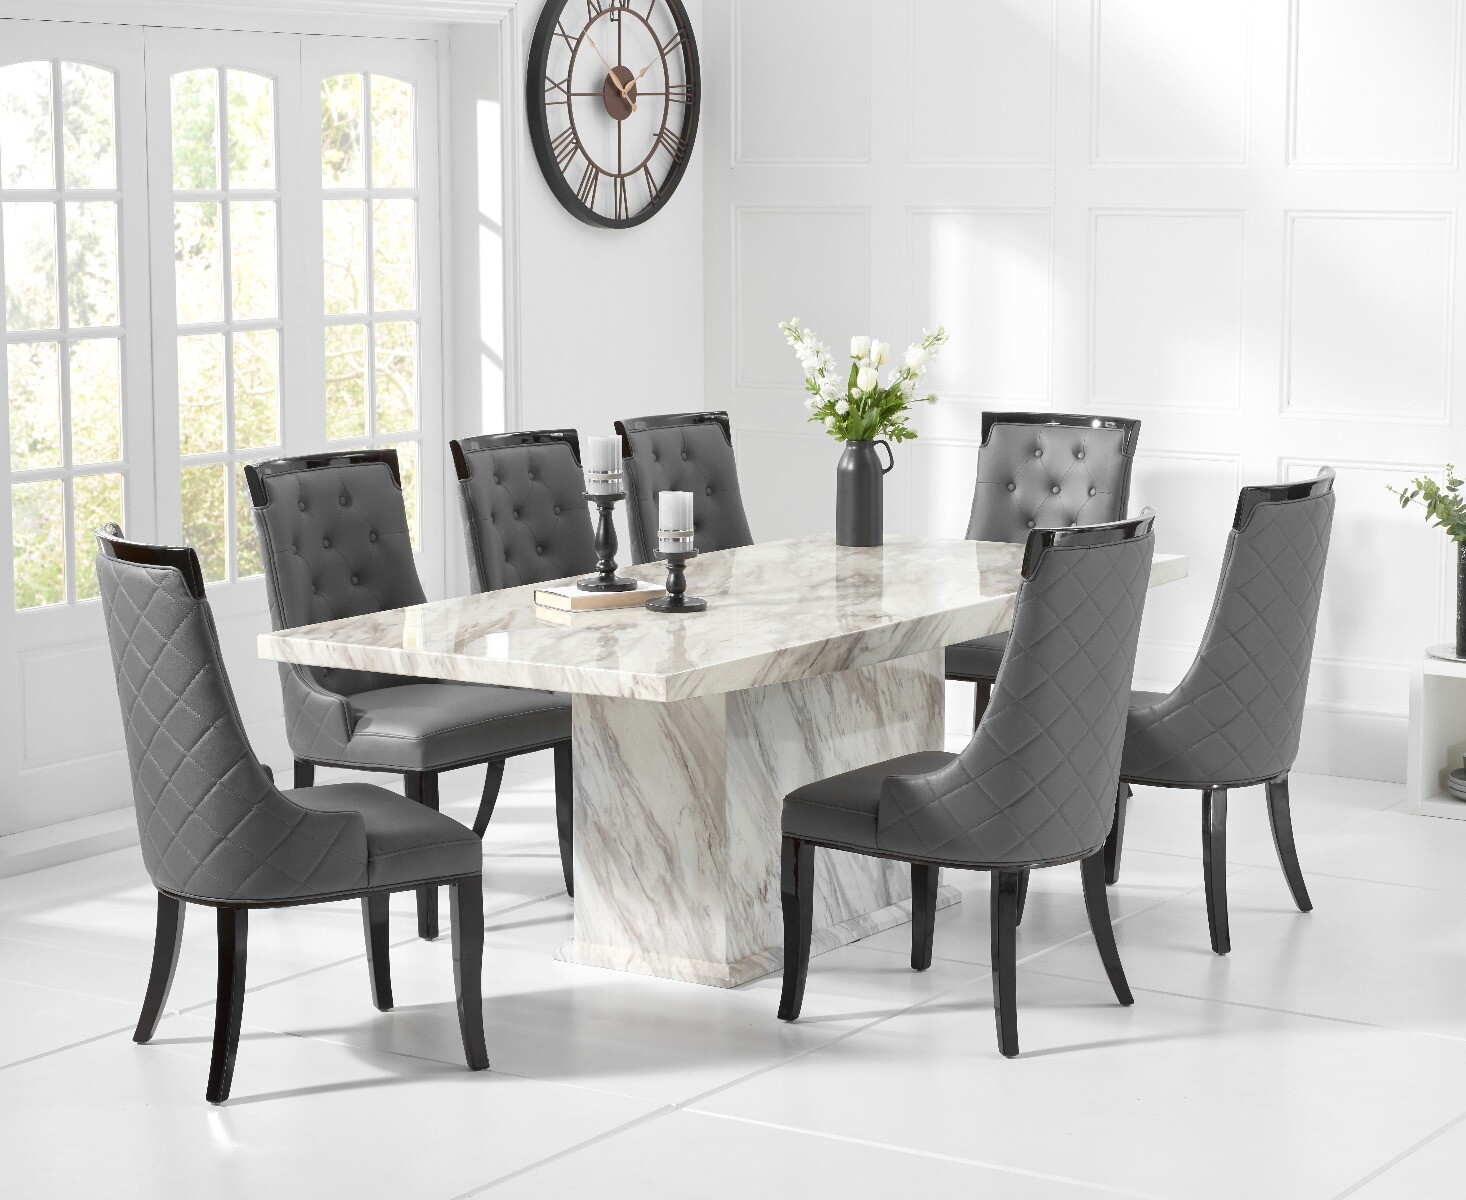 Calacatta 220cm Marbleeffect Dining Table With 6 Cream Francesca Chairs